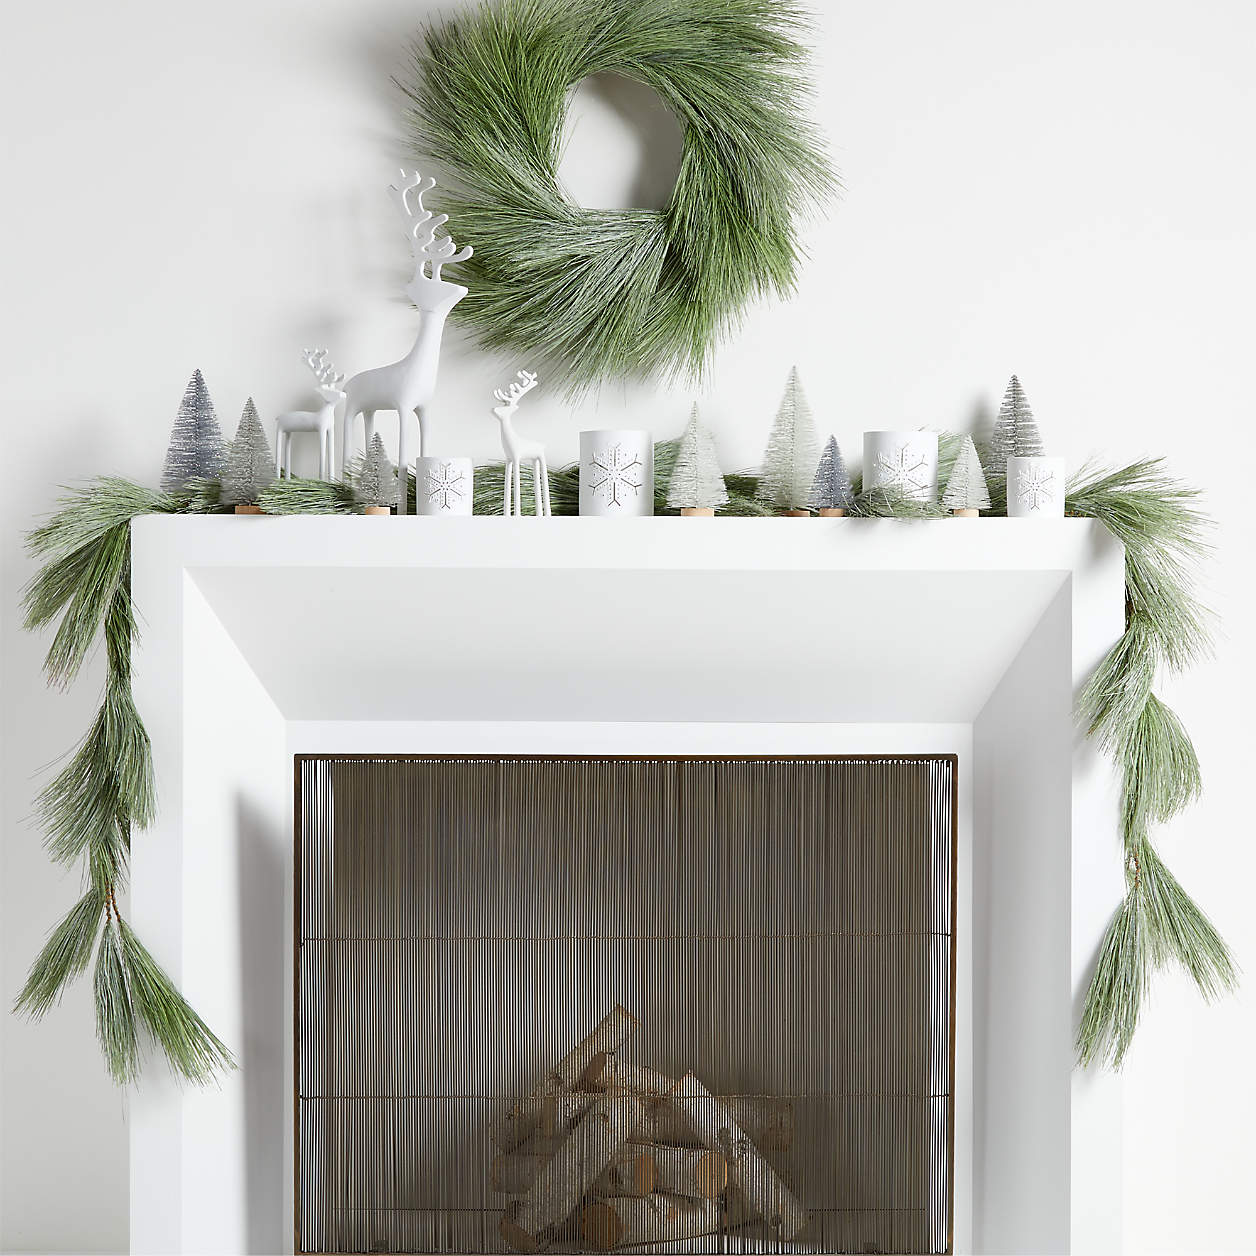 white fireplace with green pine garland, wreath hanging above and little christmas trees on the mantel